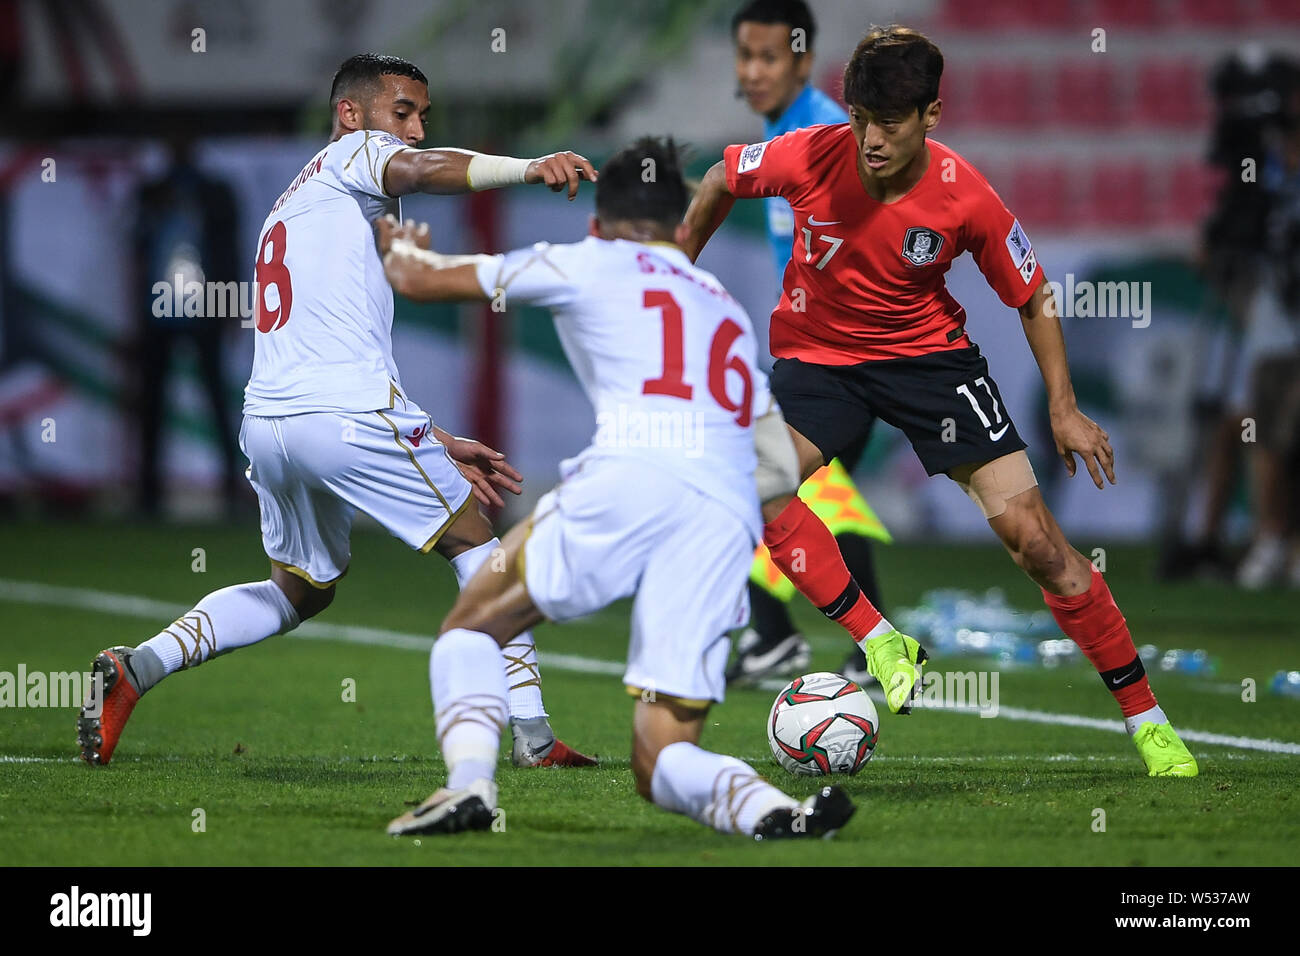 Lee Chung-yong, right, of South Korea challenges Mohamed Marhoon and Sayed Redha Isa of Bahrain in the round of 16 match between South Korea and Bahra Stock Photo